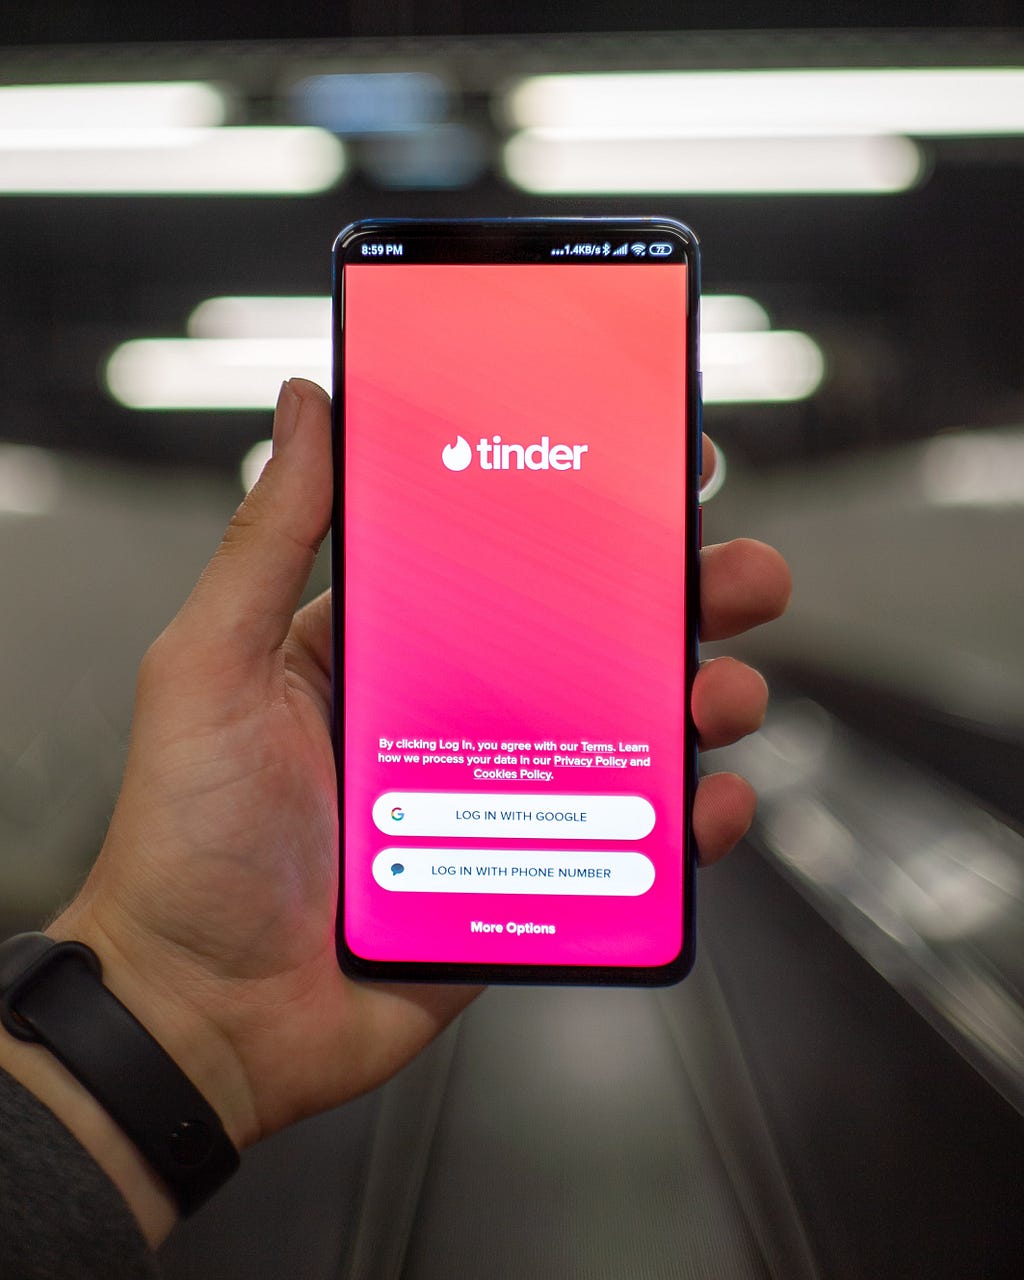 Image of a smart phone displaying the login page to Tinder.